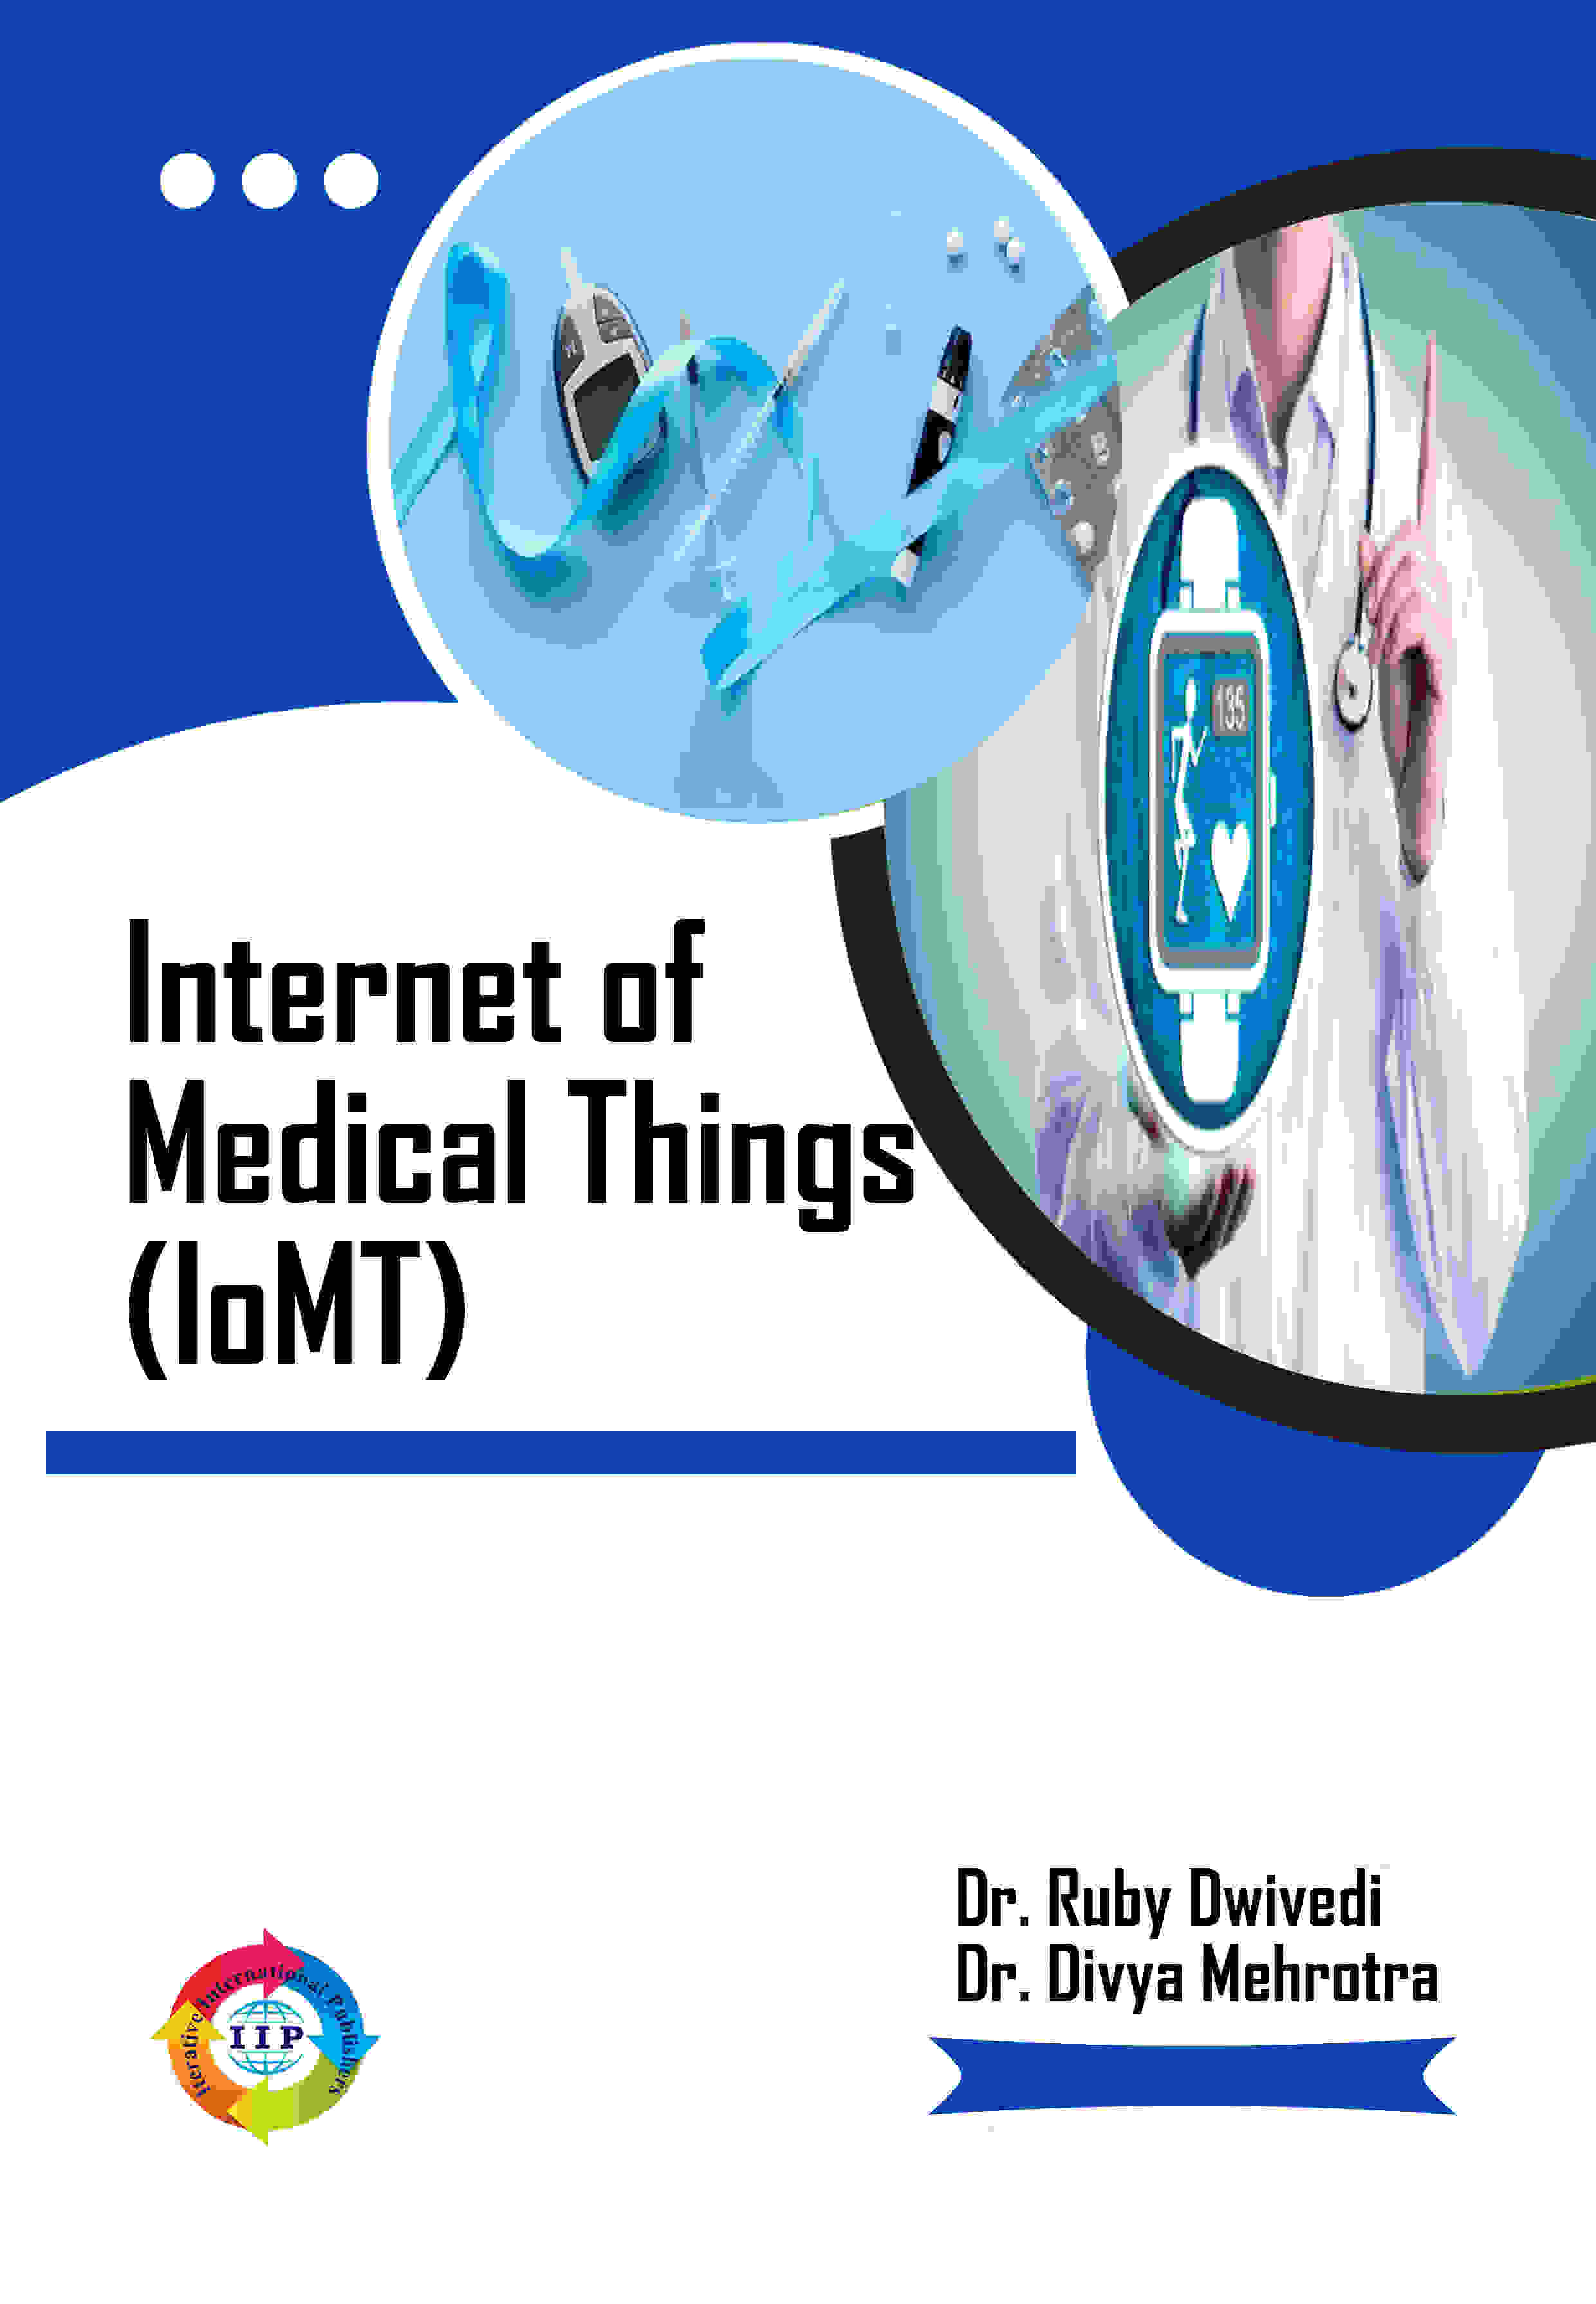 INTERNET OF MEDICAL THINGS (IOMT)